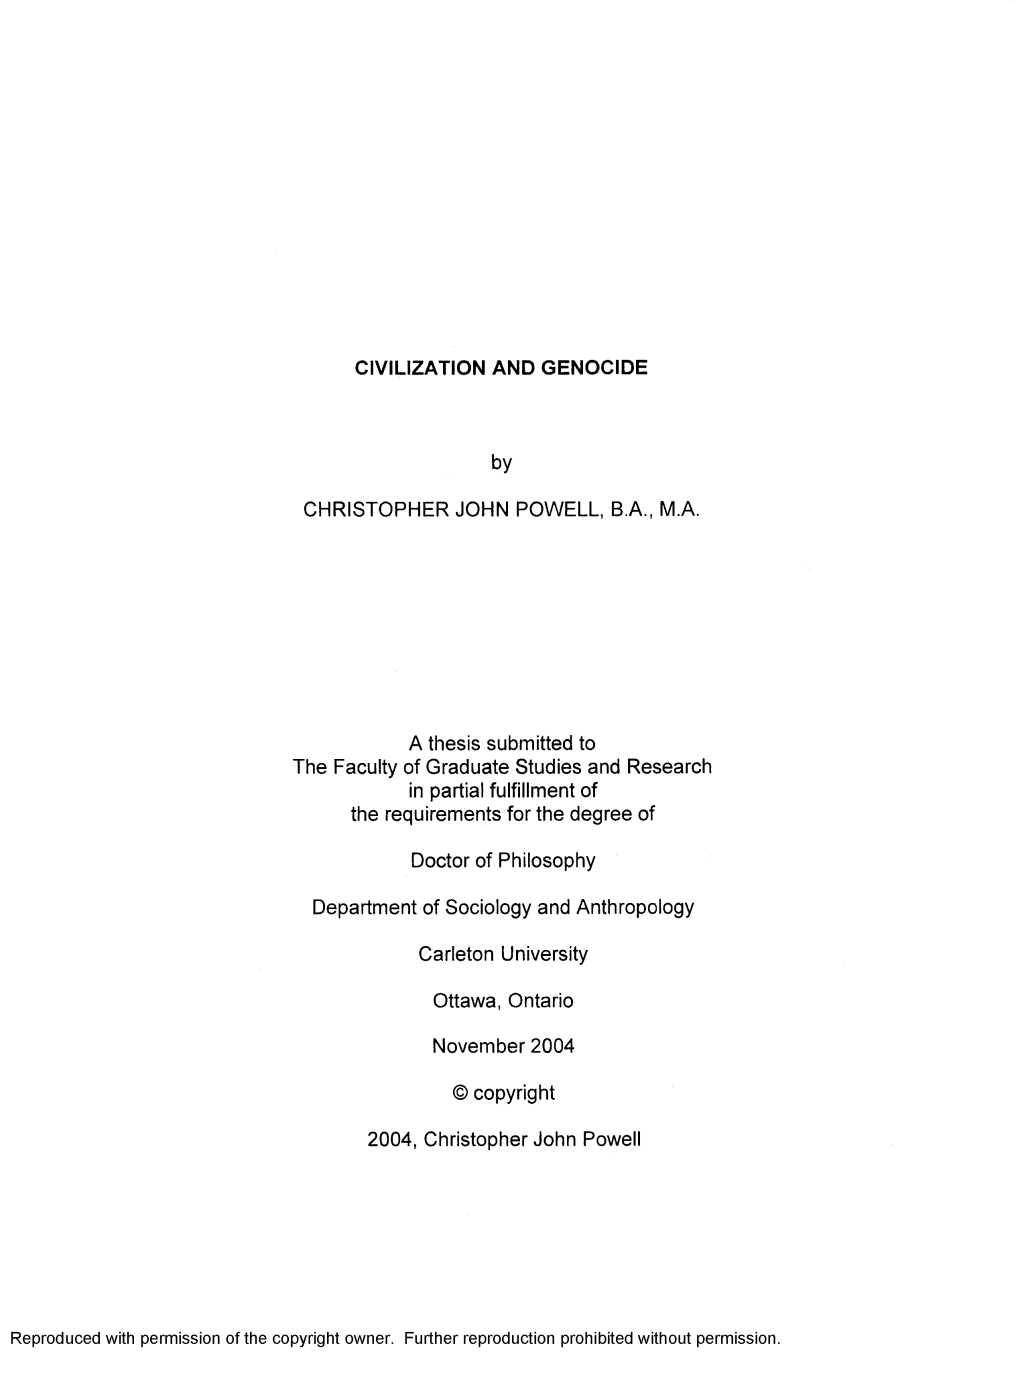 CIVILIZATION and GENOCIDE by CHRISTOPHER JOHN POWELL, B.A., M.A. a Thesis Submitted to the Faculty of Graduate Studies and Resea